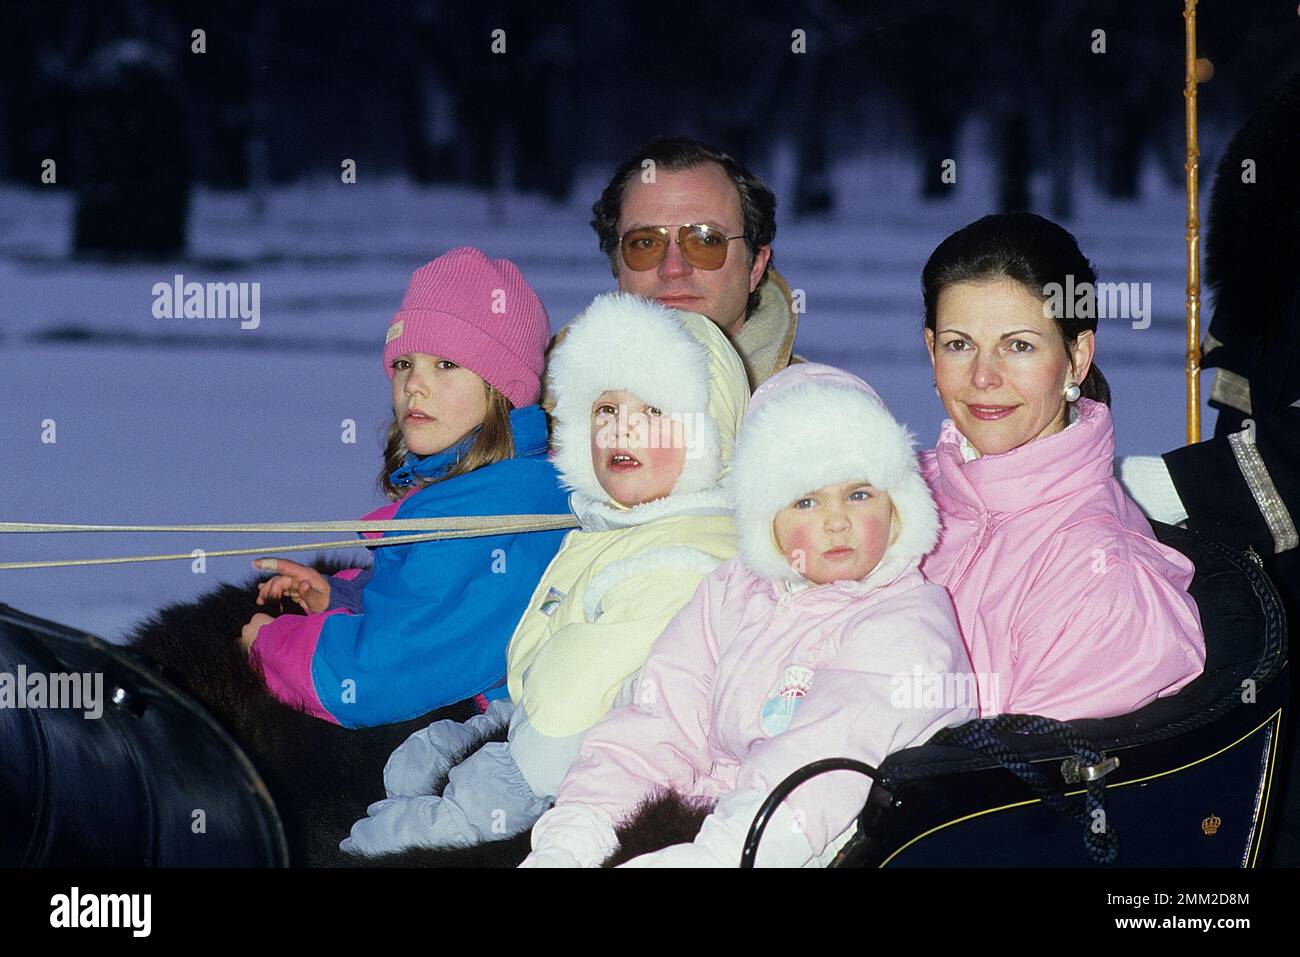 Carl XVI Gustaf, King of Sweden. Born 30 april 1946.  The King Carl XVI Gustaf,  Queen Silvia and their children, princess Madeleine, crown princess Victoria, prince Carl Philip, pictured in the park of Drottningholm castle 1985 at the annual christmas/winter photo session. Stock Photo